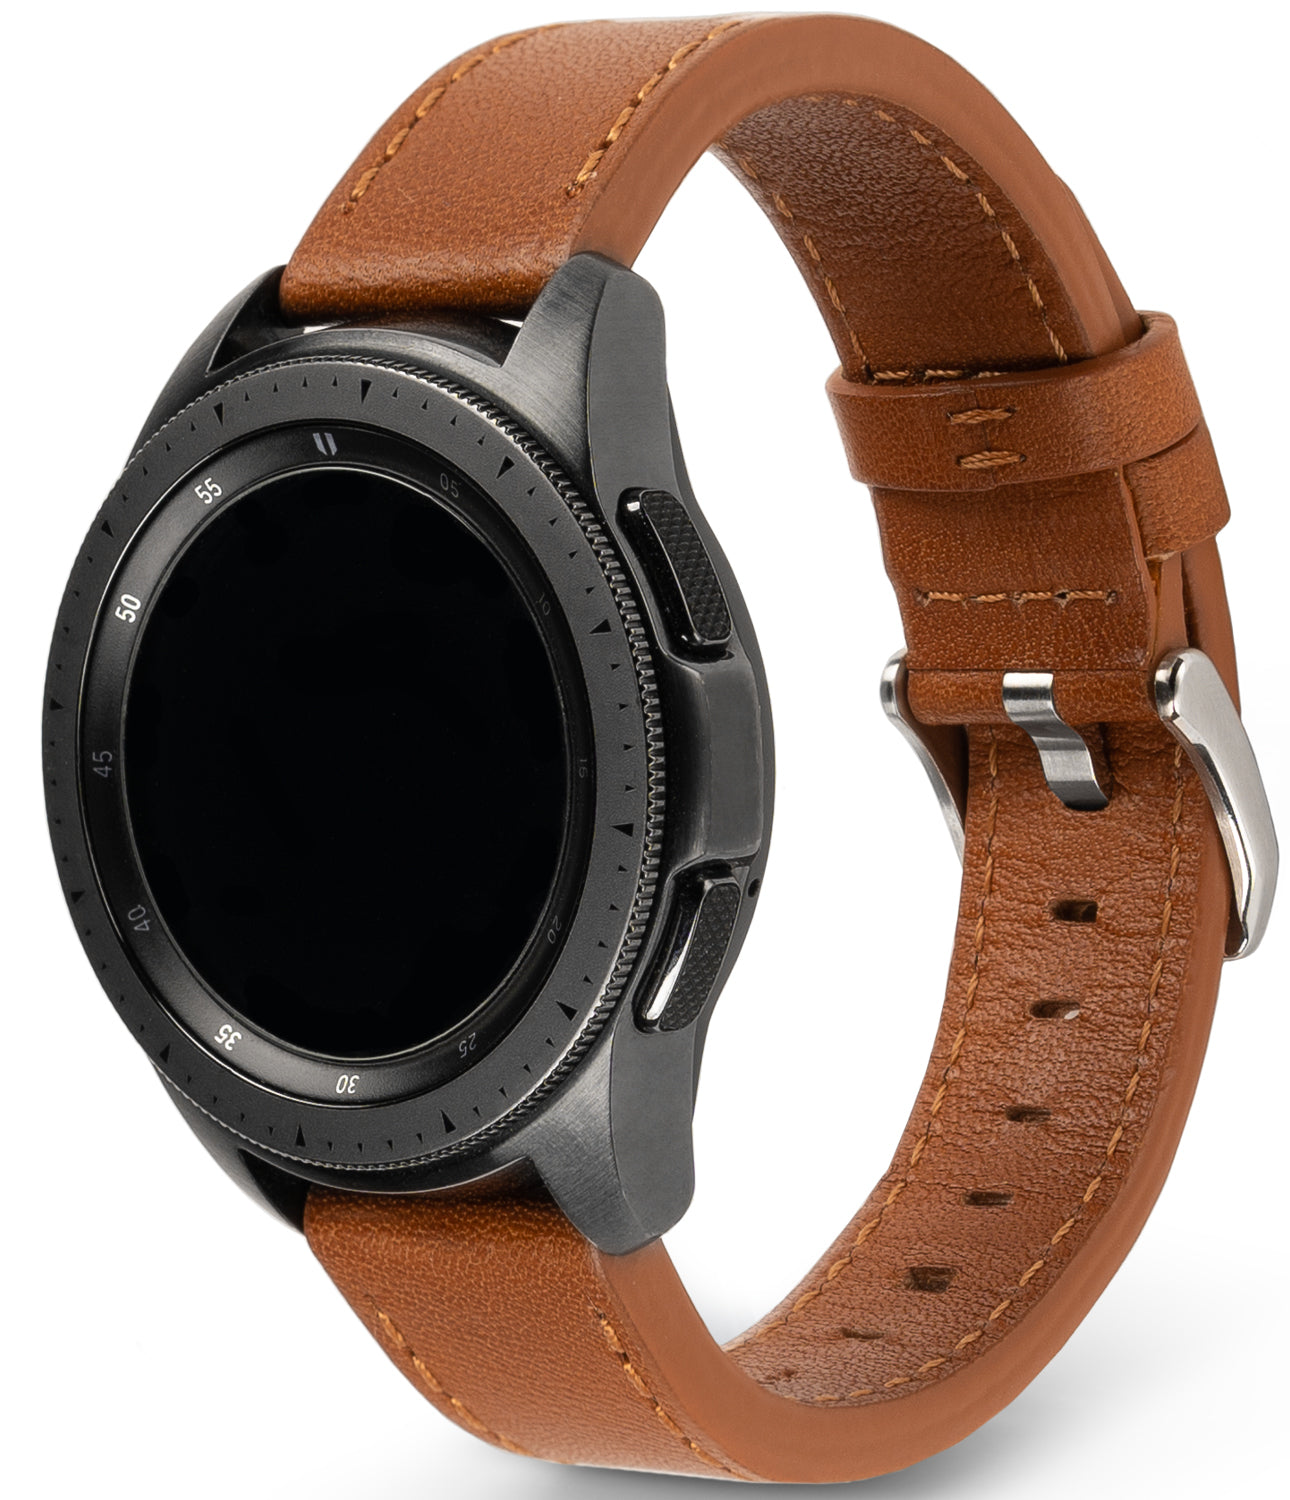 smartwatch band - ringke leather one classic band for watch lug size 22mm - compatible with glaaxy watch 3 45mm | galaxy watch 46mm | huawei gt / gt 2 46mm